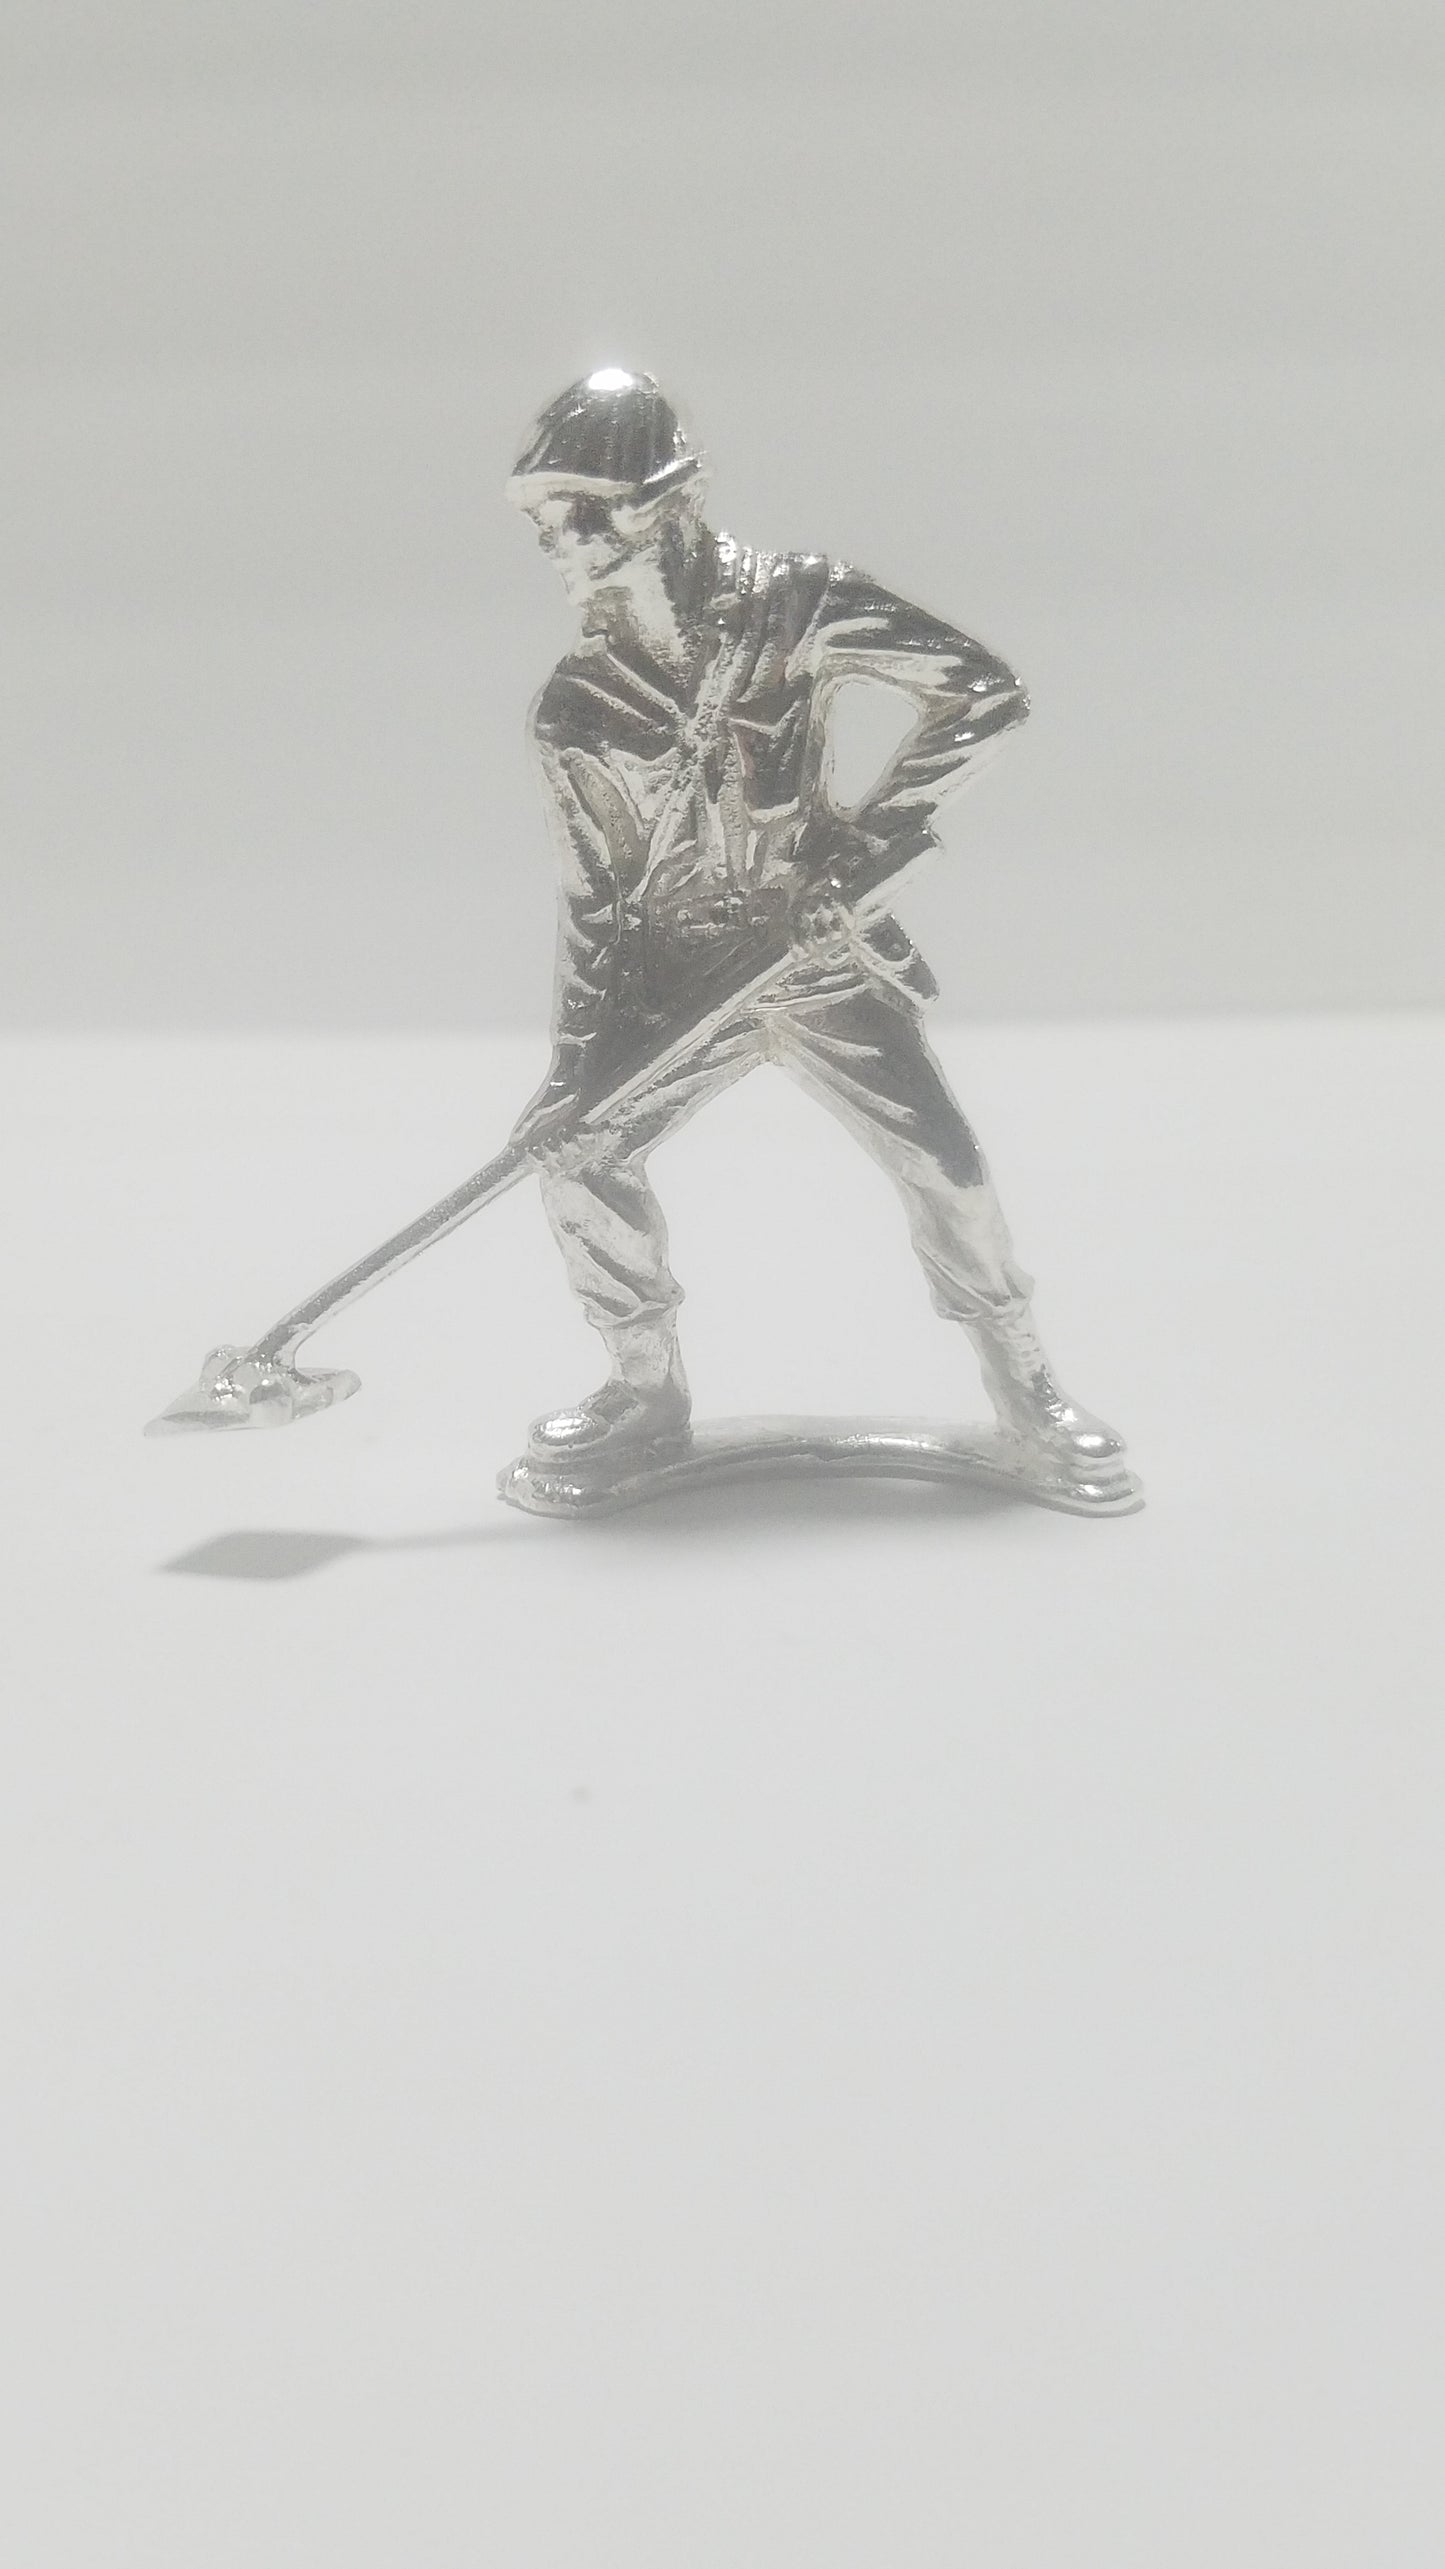 Classic Army Man Minesweeper Soldier 1.25 oz 999 Silver Hand Poured Bullion